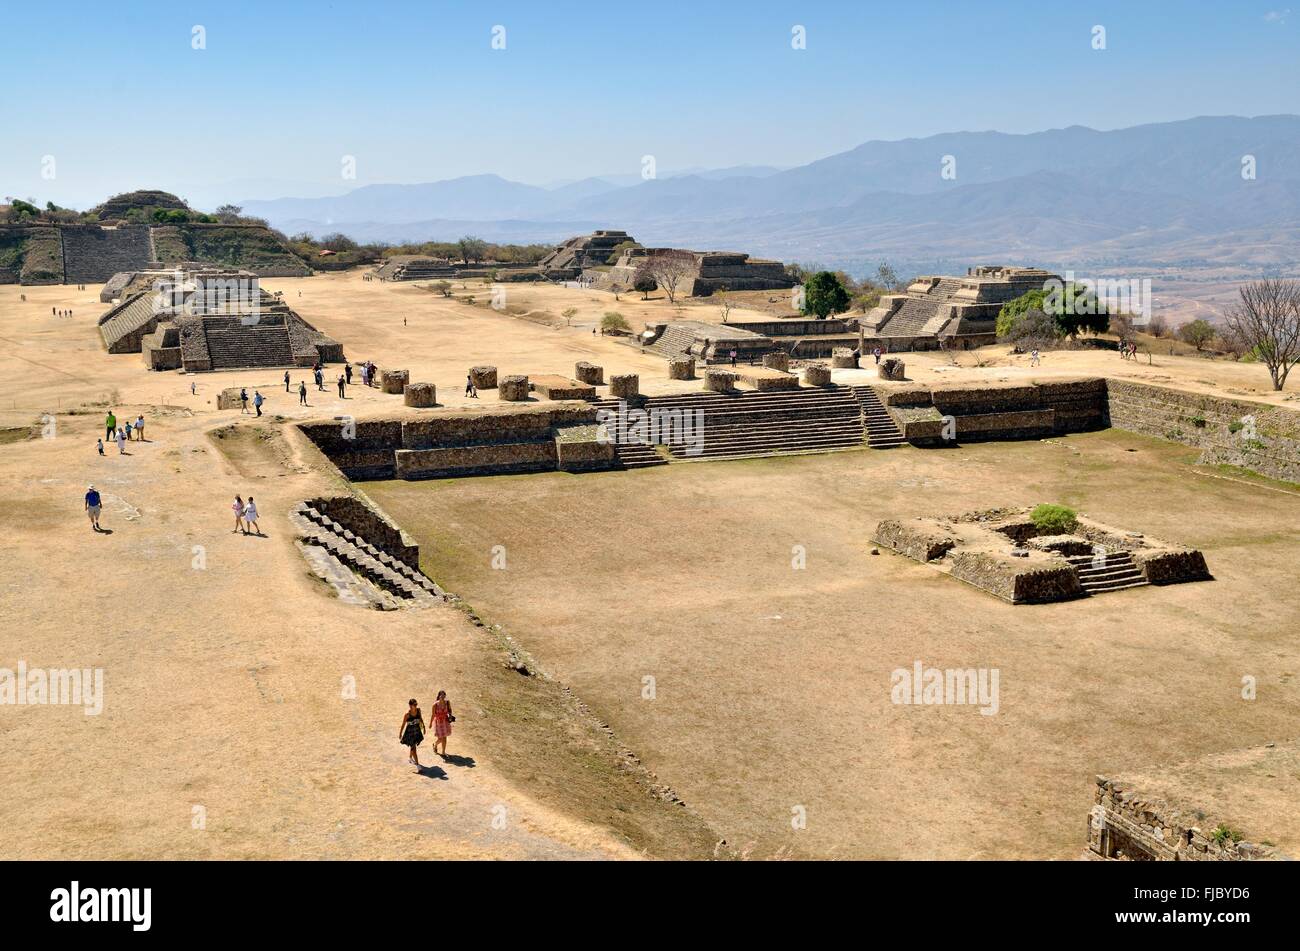 Overlooking the Patio Hundido on the southwestern part of the archaeological site Monte Alban in Oaxaca, Oaxaca, Mexico Stock Photo